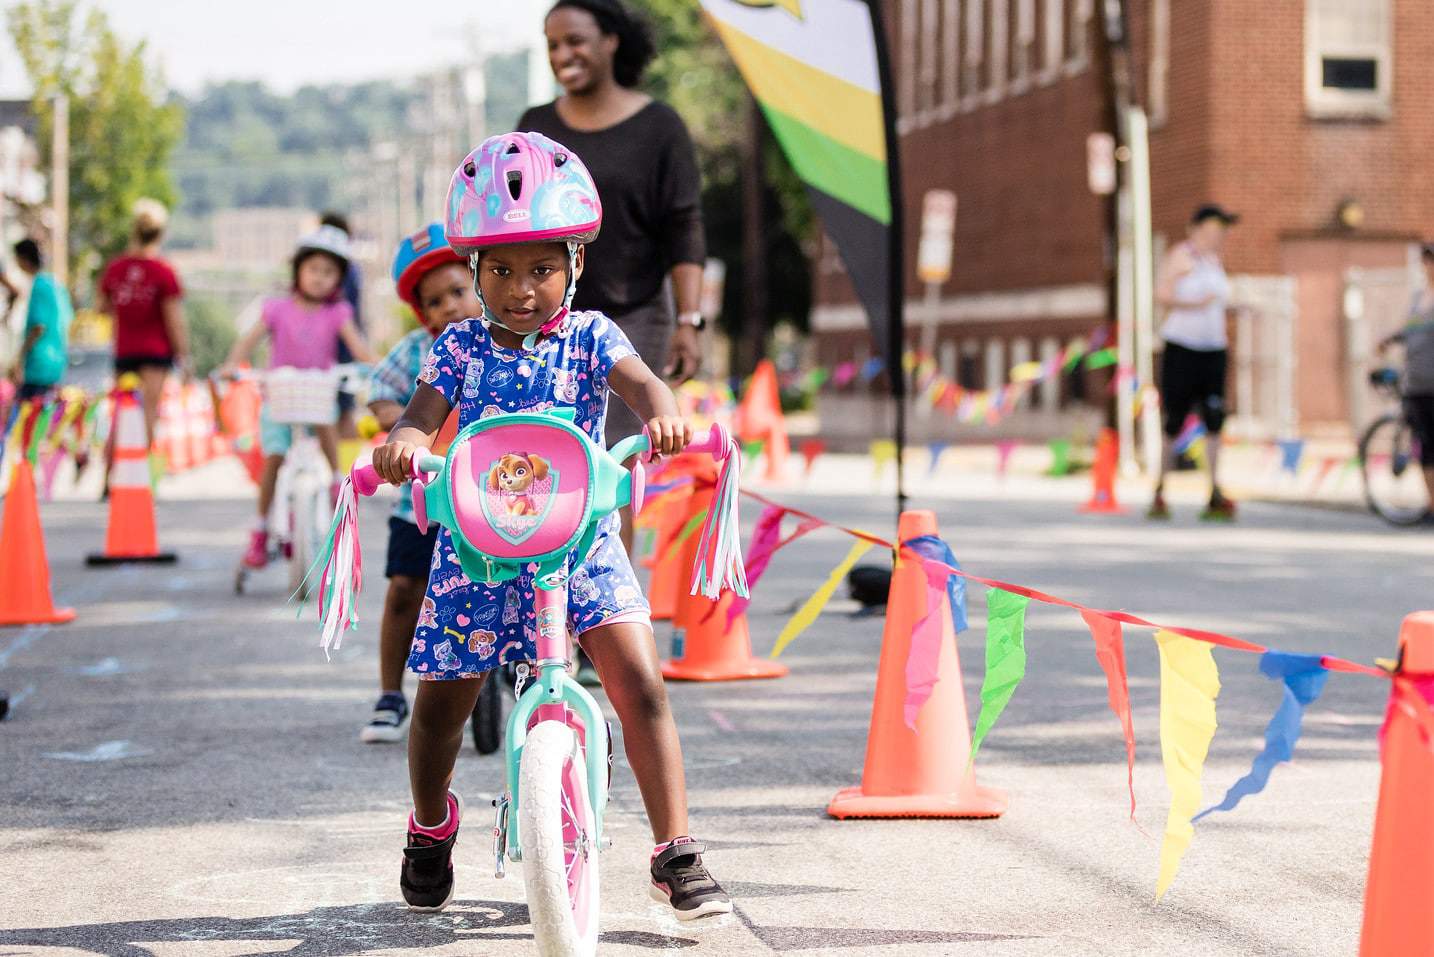 Young girl on a bikes walks her brightly colored bicycle along an obstacle course made of orange cones and flags. She looks focused and adorable! A woman stands behind the kiddo smiling and blurry in the background